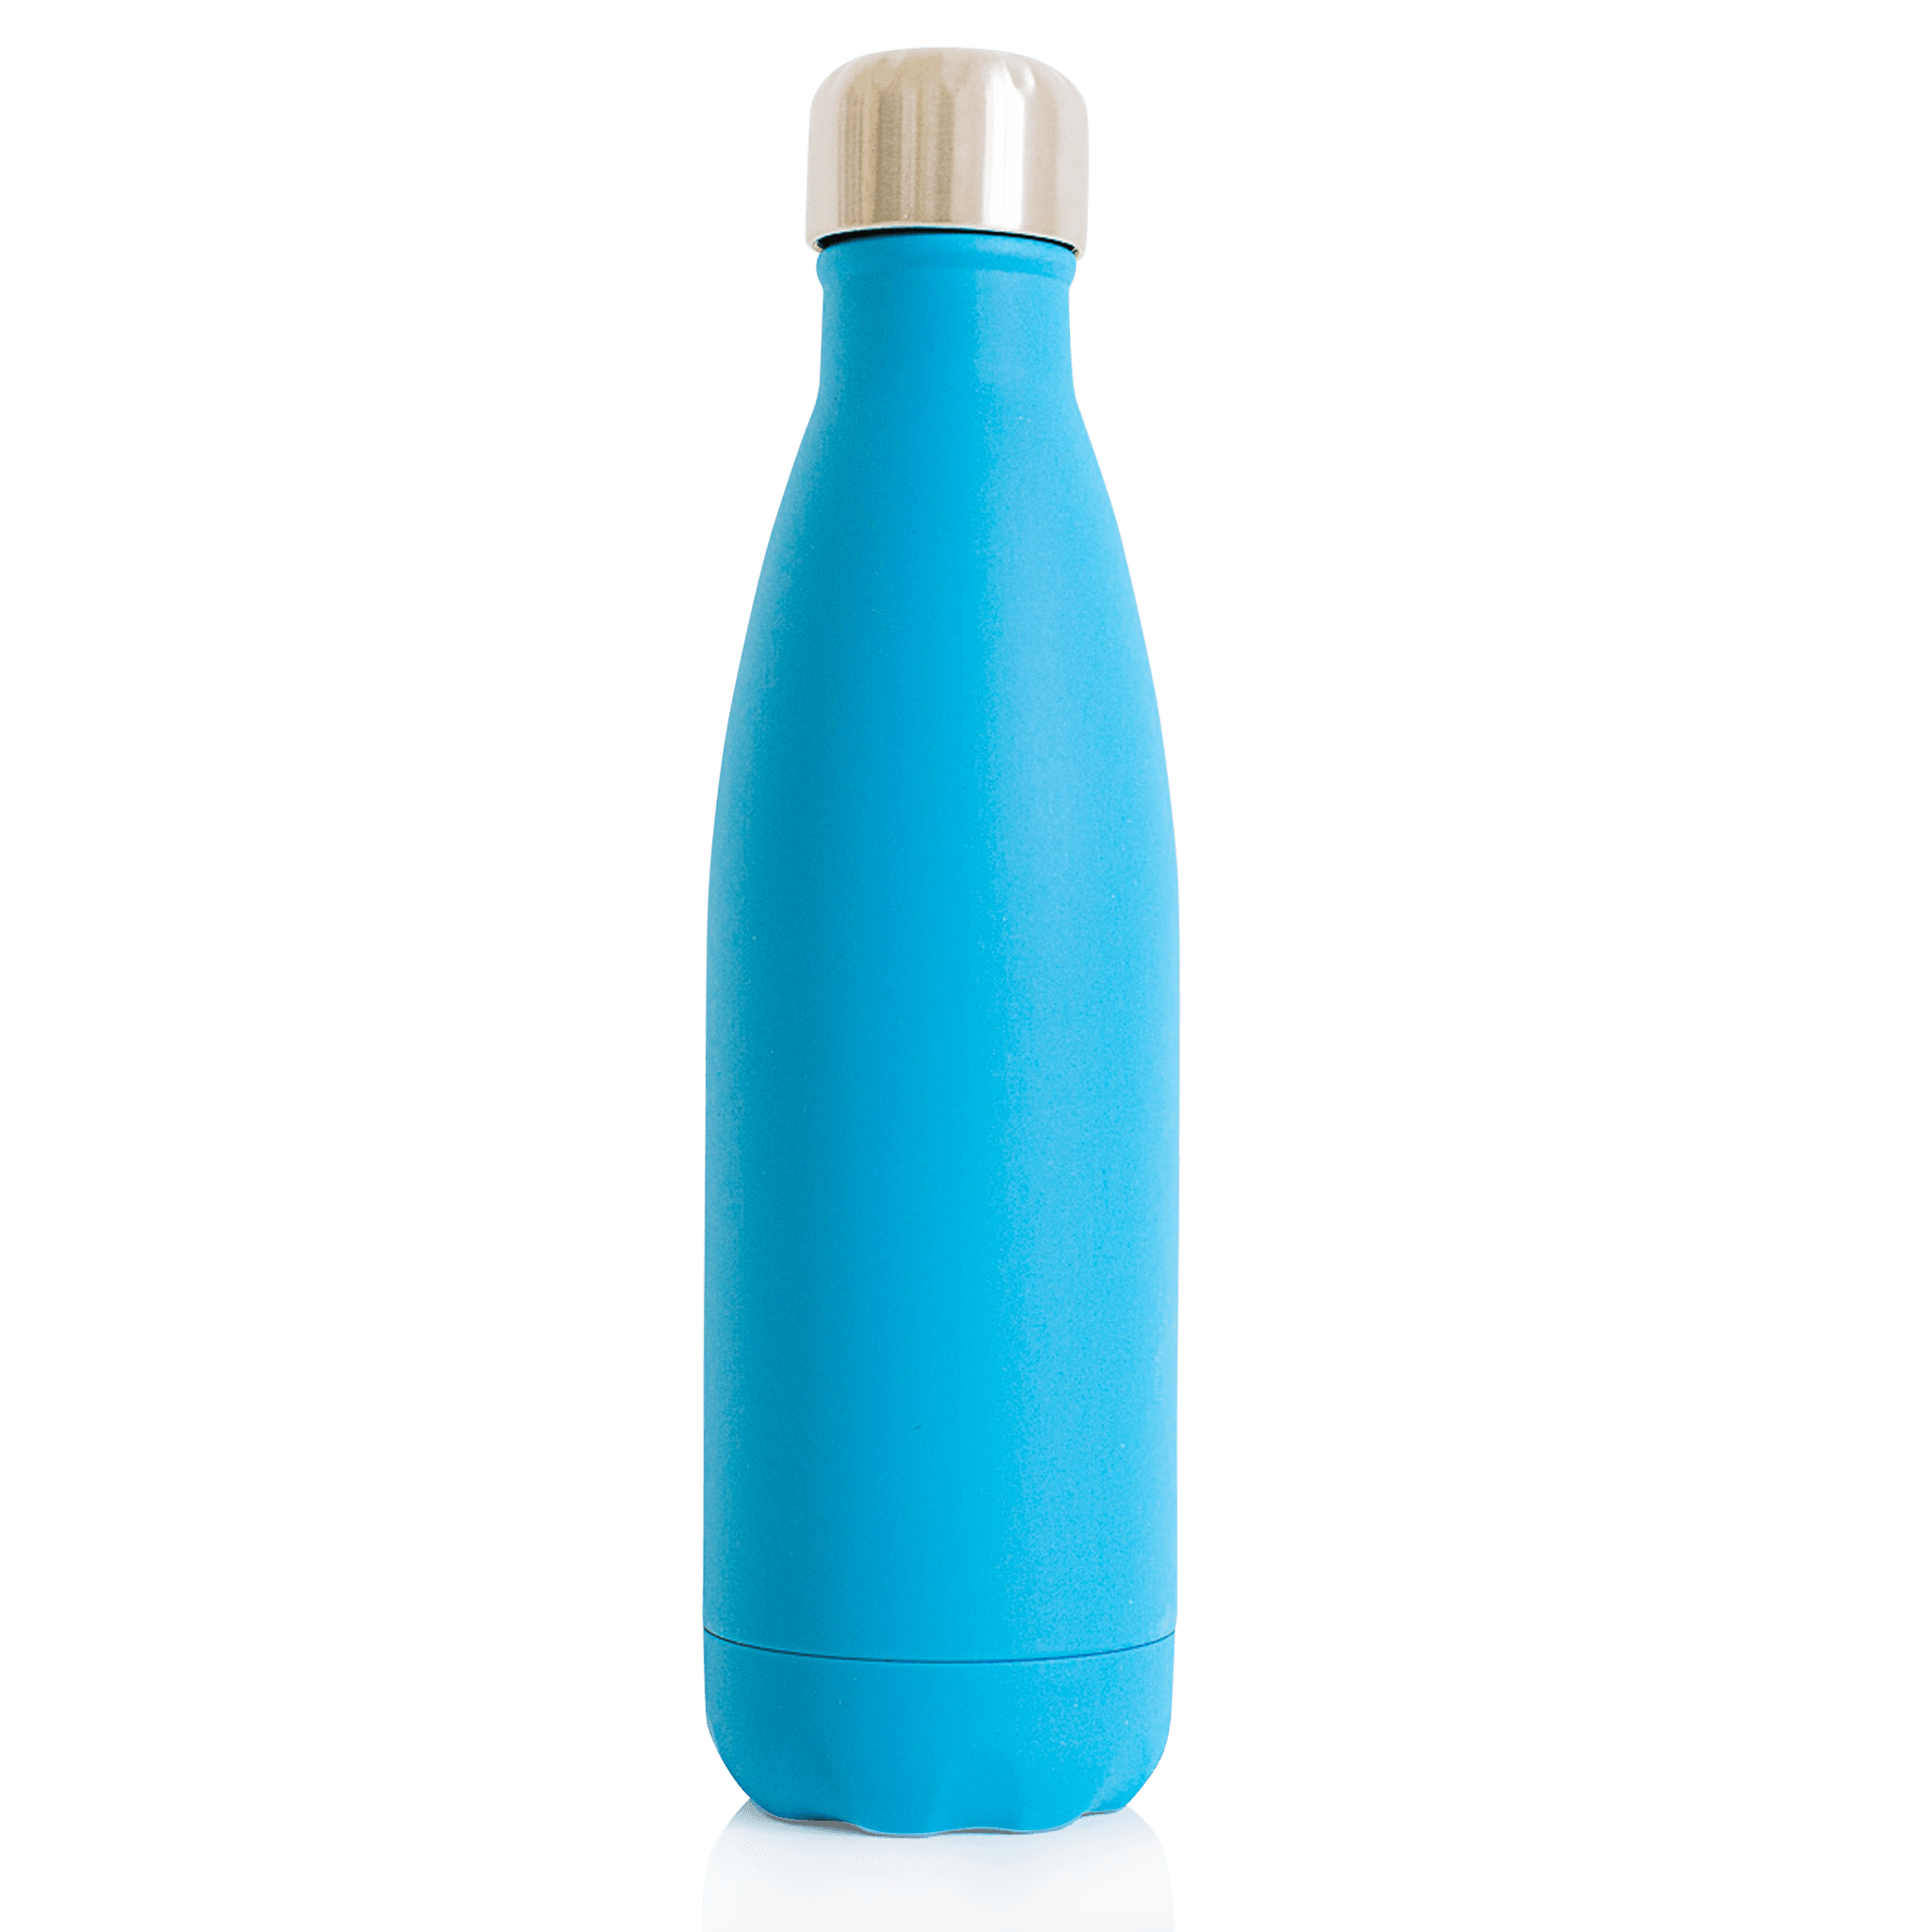 Water Bottle Premium Stainless Steel 18/8  - 500ml -  Blue - Eco Kindly